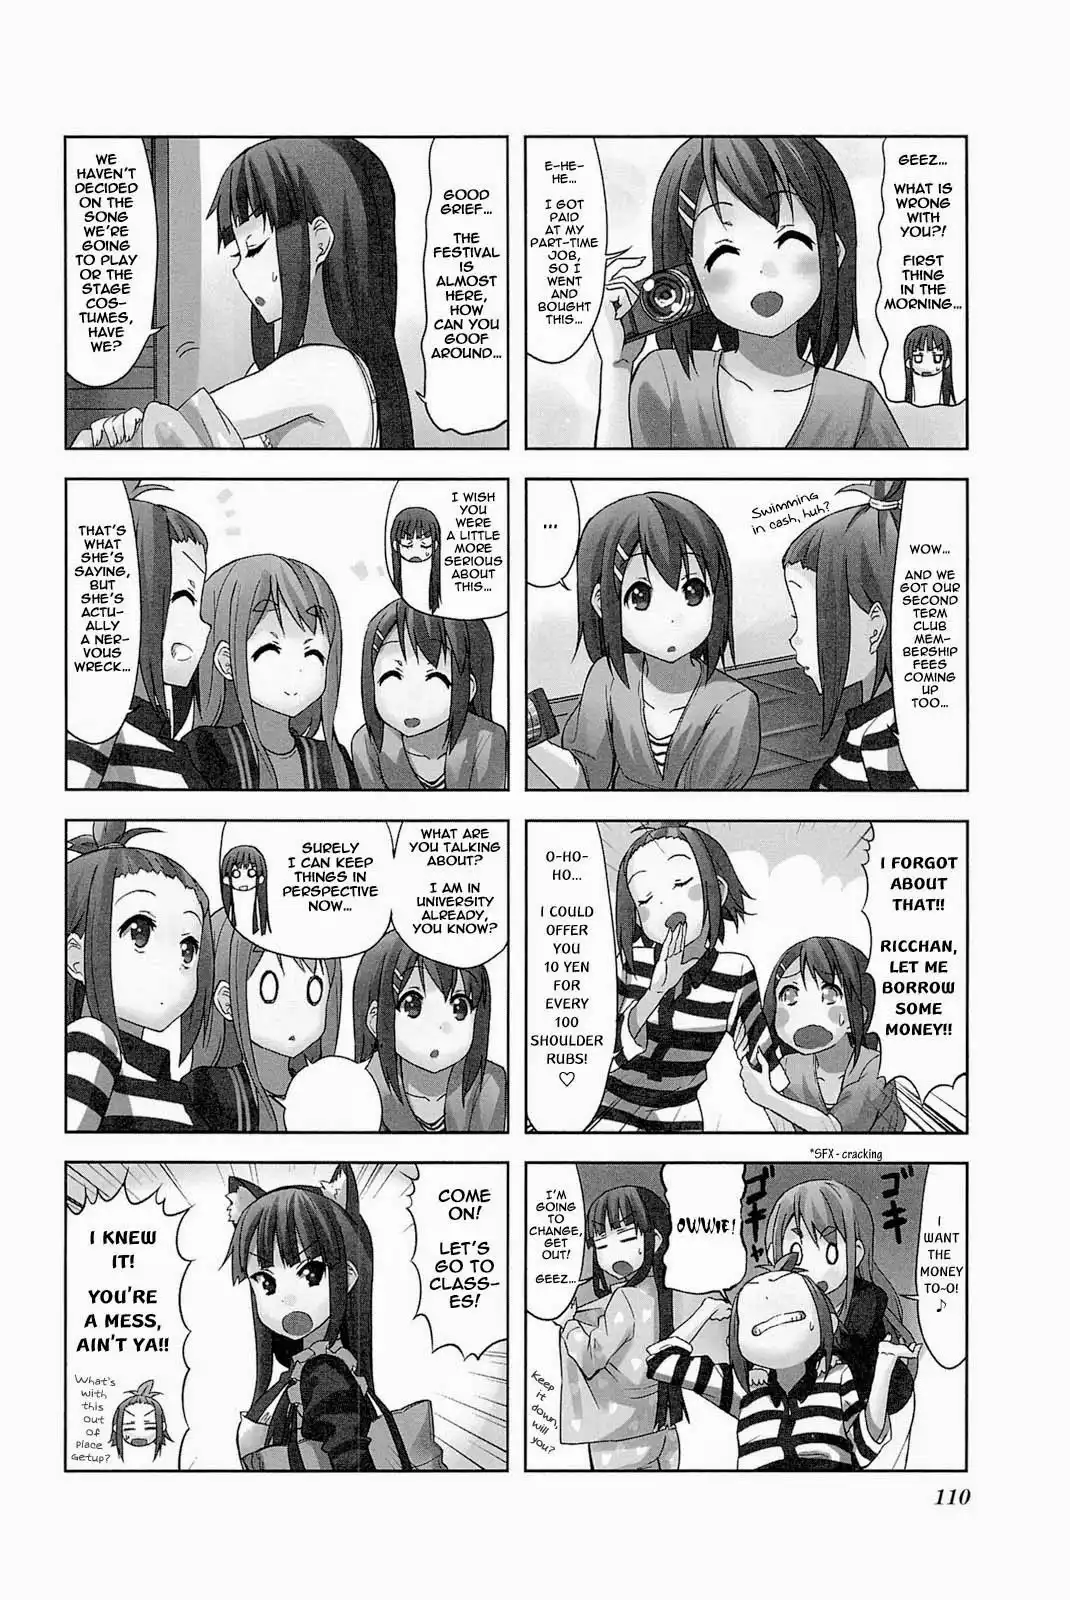 K-ON! - College Chapter 13